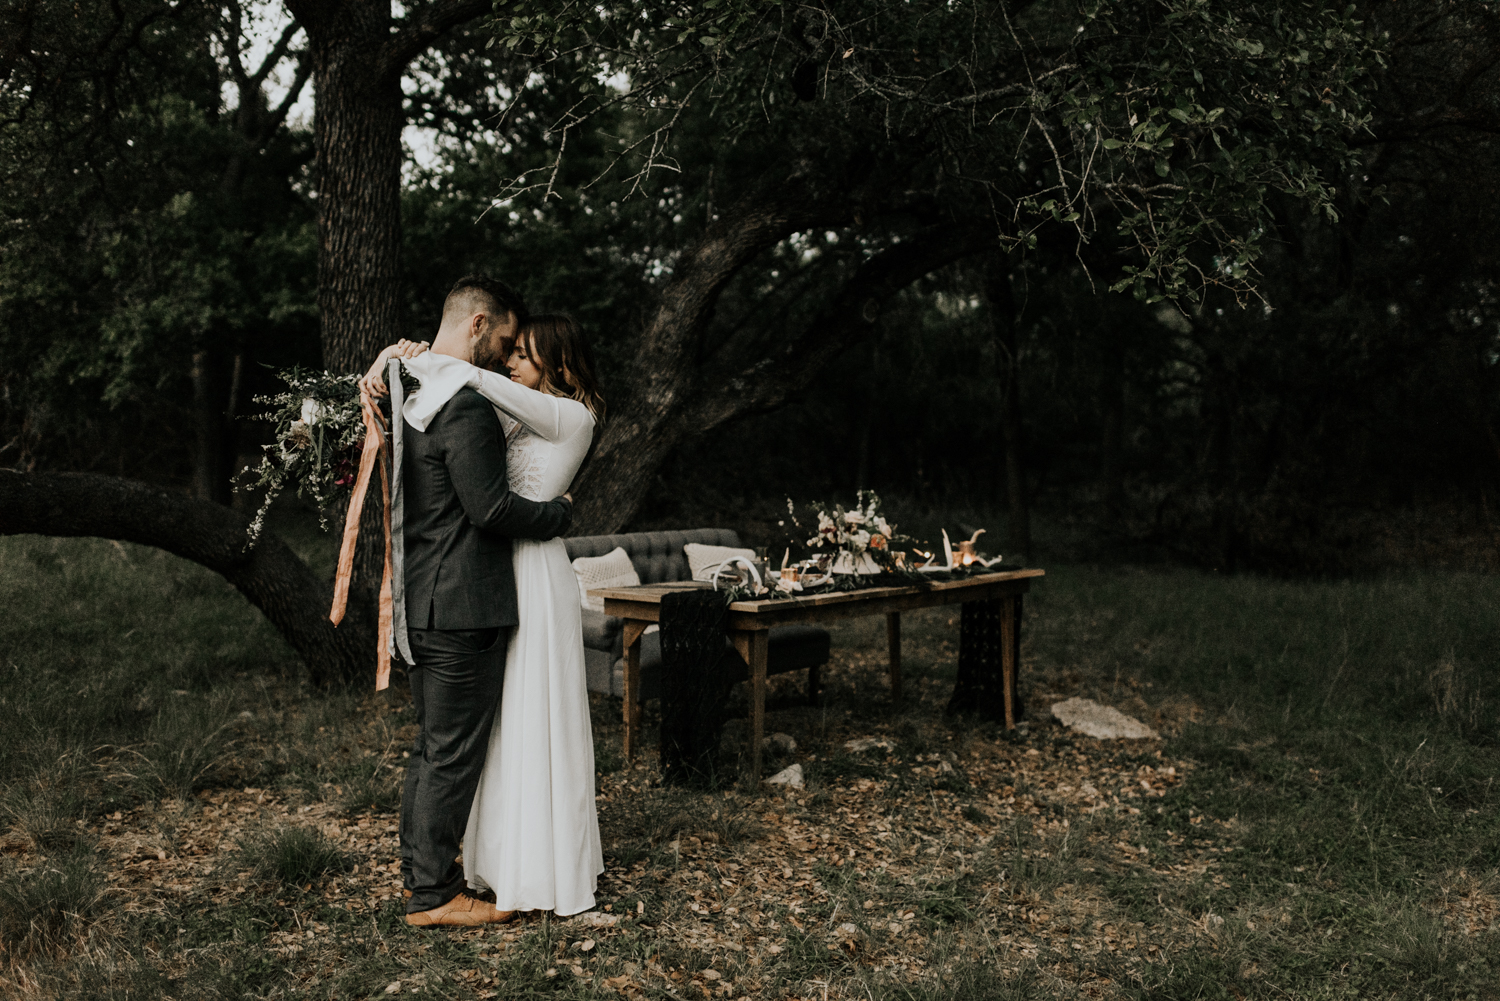 Intimate Vow Renewal in the Texas Hill Country